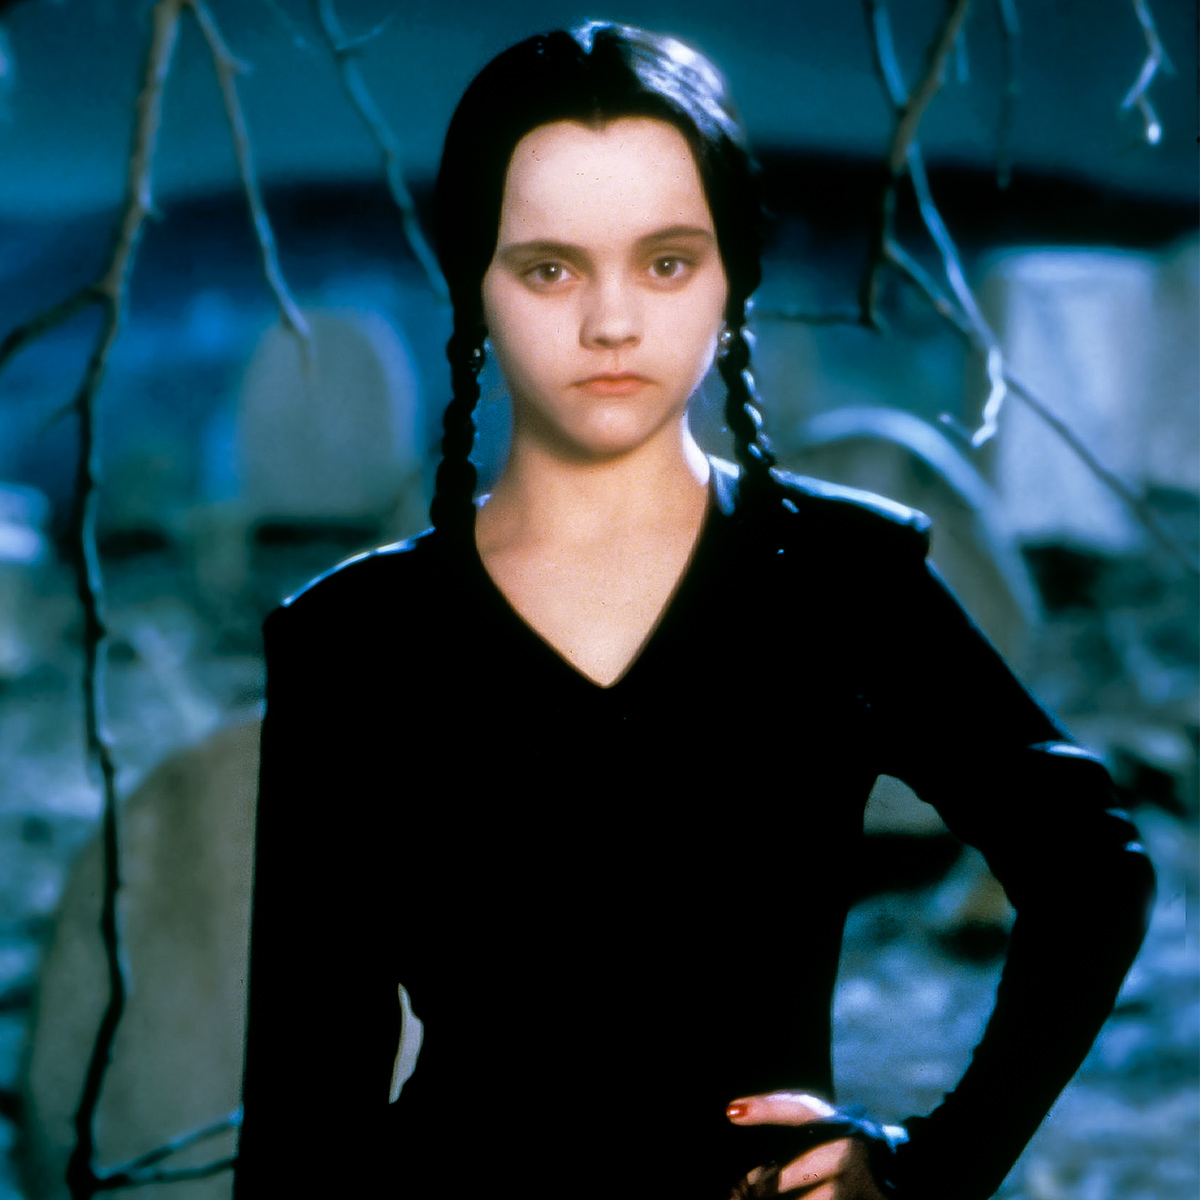 Christina Ricci Gives Wednesday Series Her Stamp of Approval